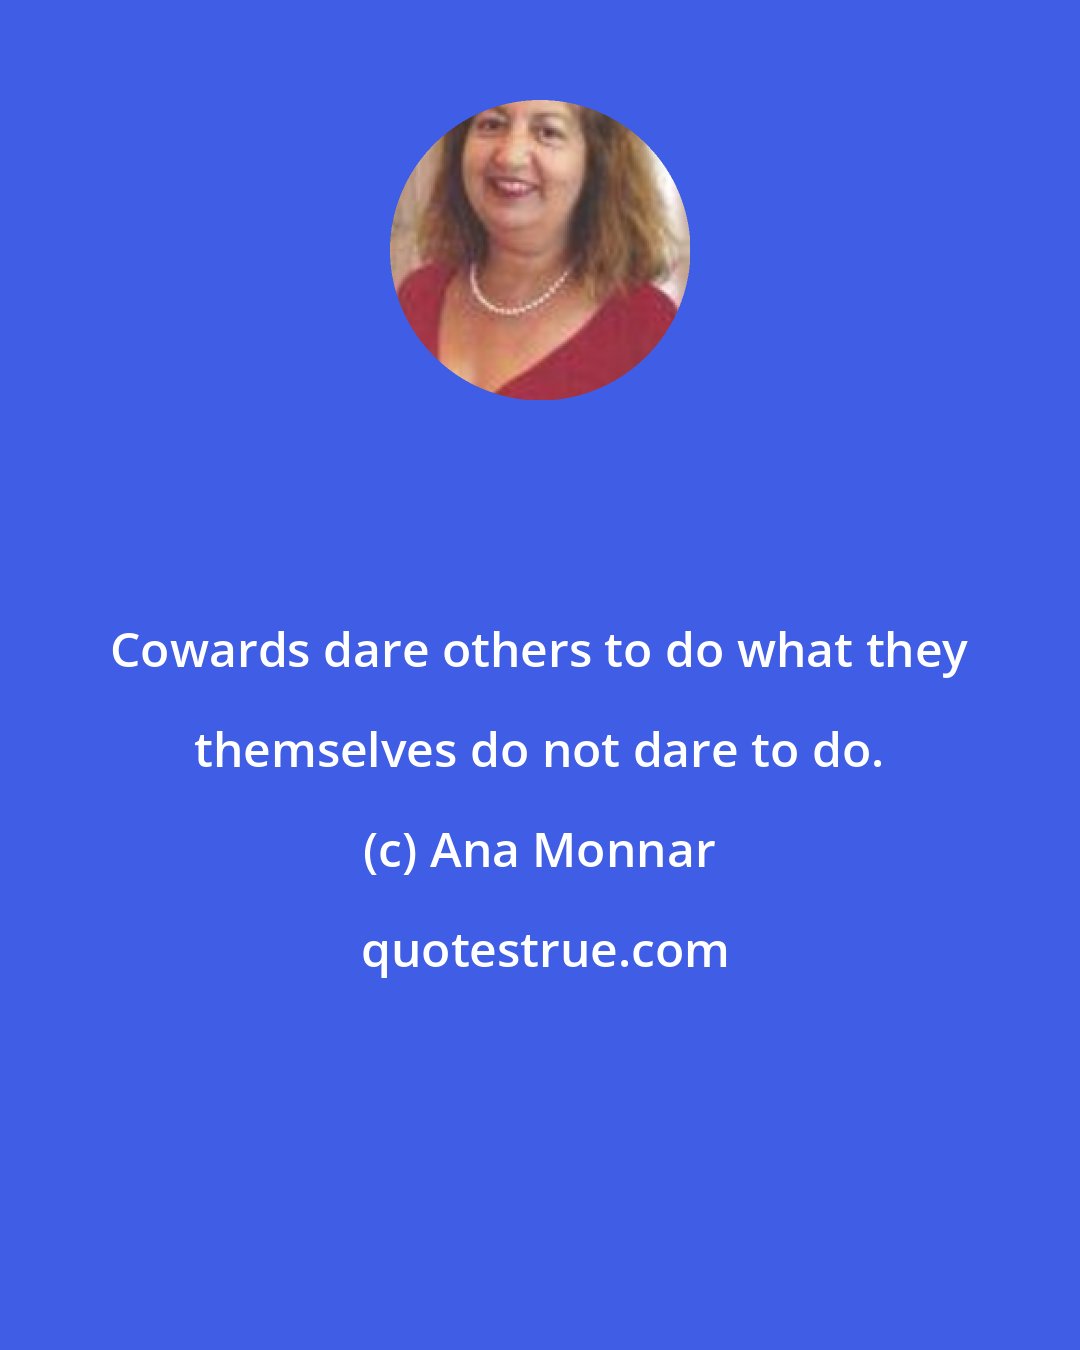 Ana Monnar: Cowards dare others to do what they themselves do not dare to do.